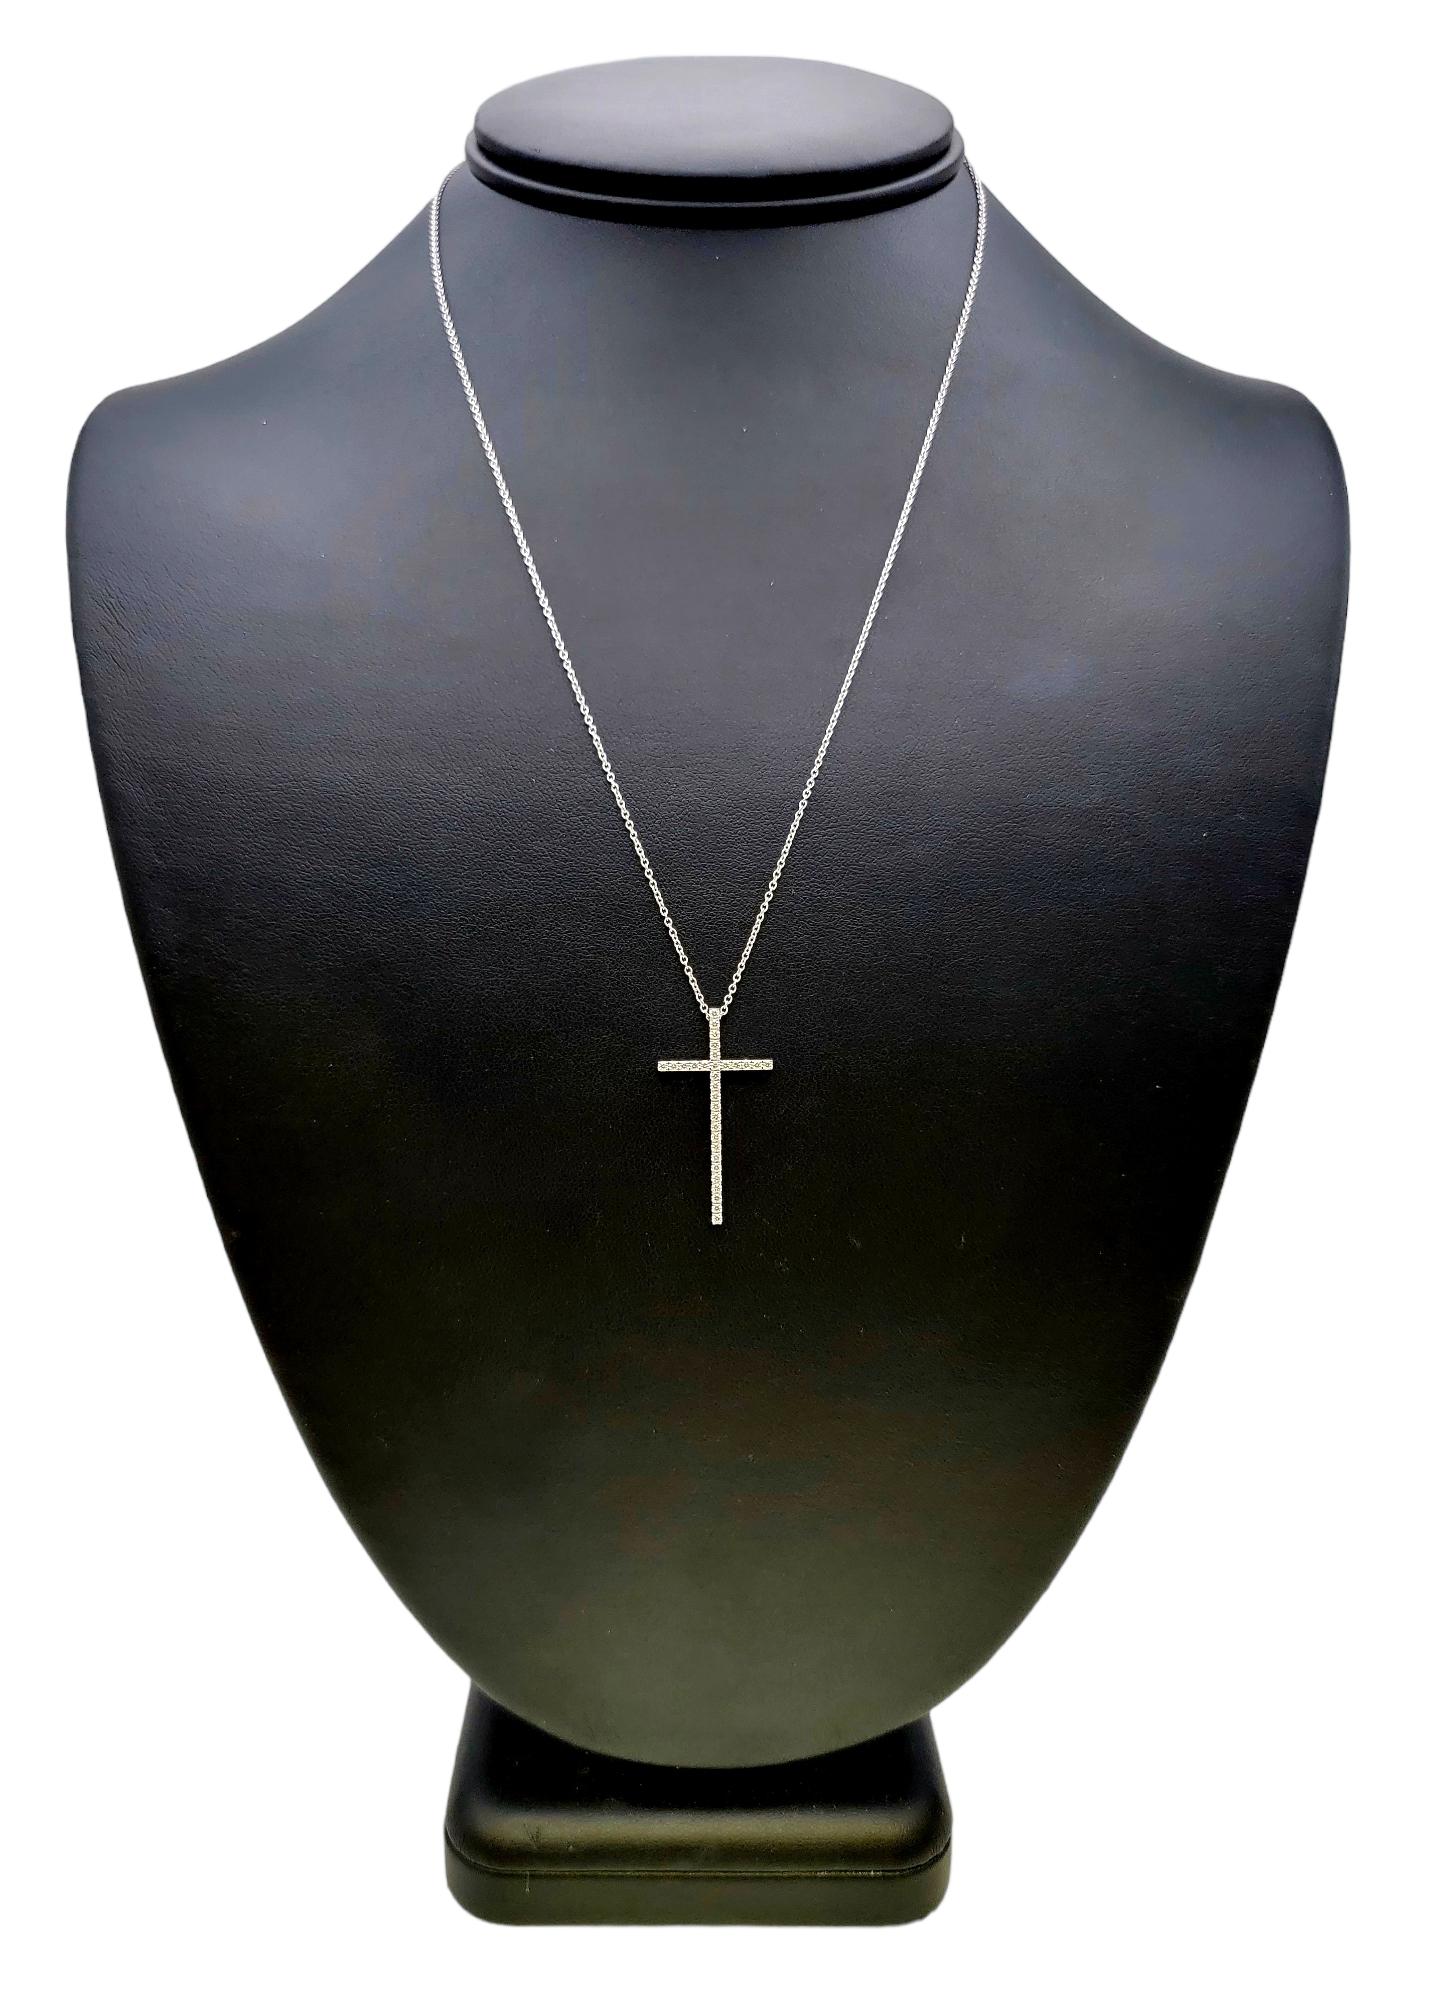 Tiffany & Co. Narrow Cross Pendant Necklace with Diamonds in 18 Karat White Gold For Sale 1